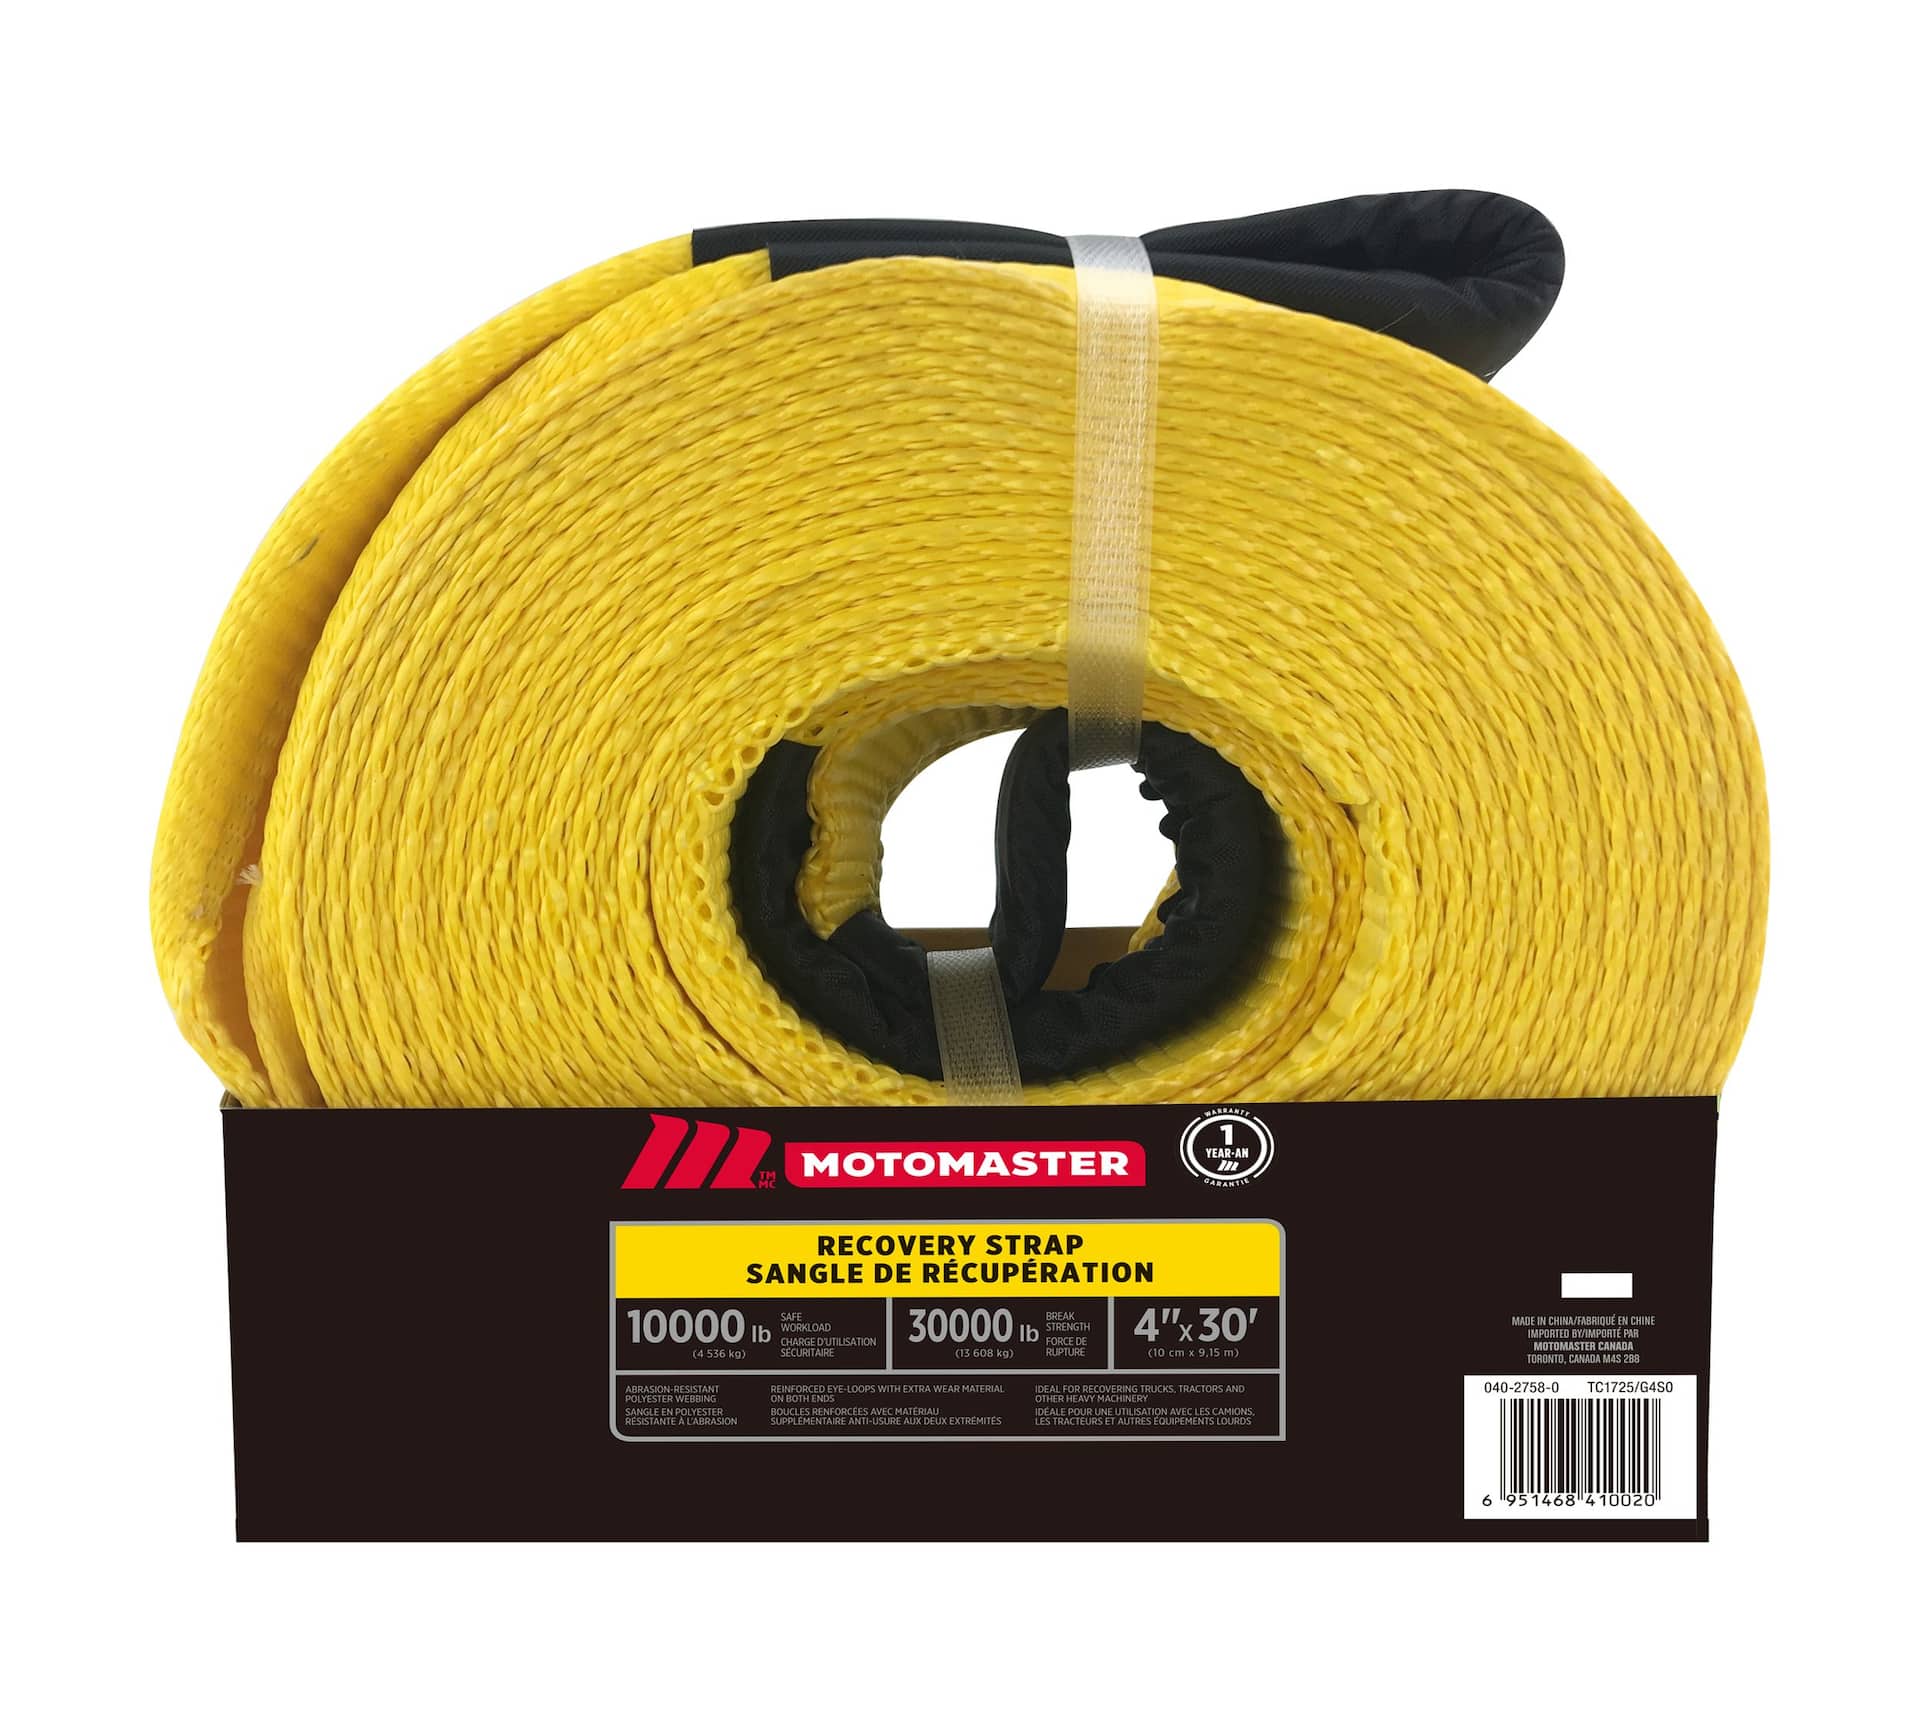 MotoMaster 5,000-lb Padded Handle Ratchet Tie Down Strap, 1.5-in x